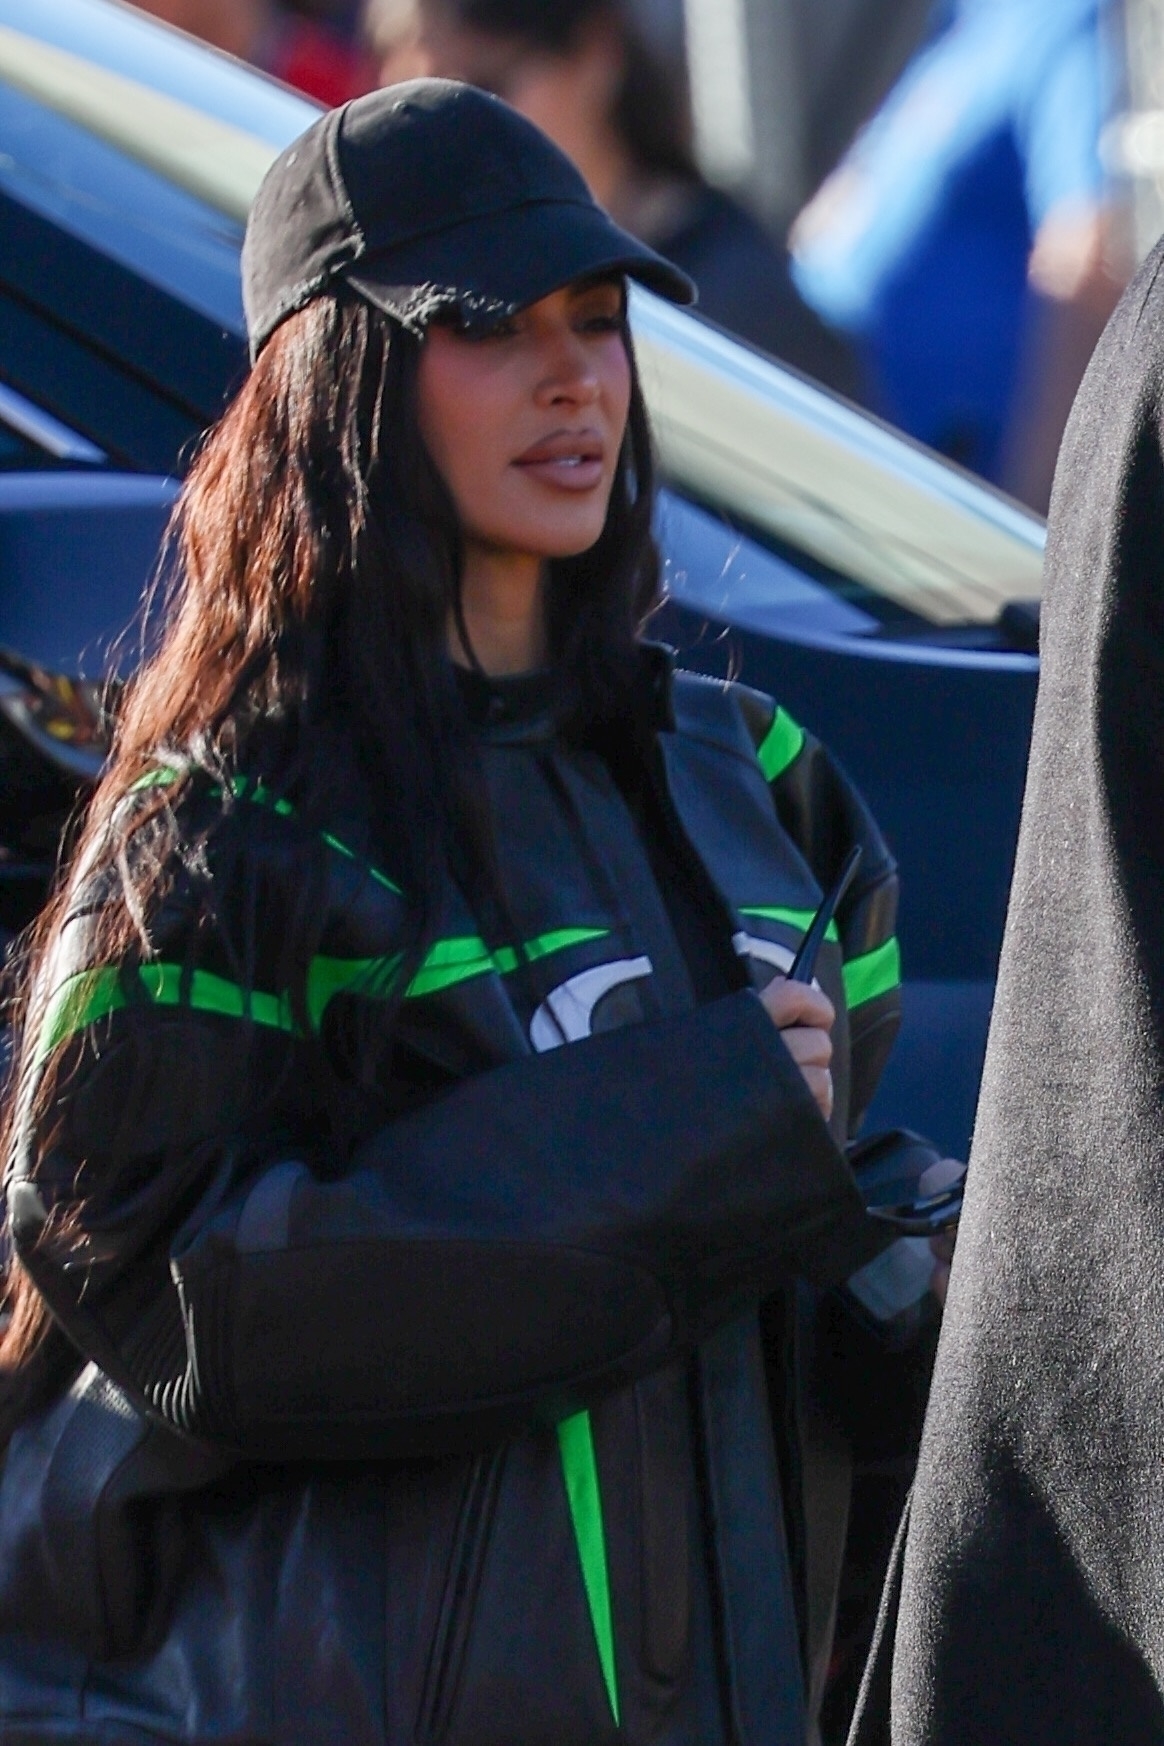 Kim Kardashian was also spotted at the game